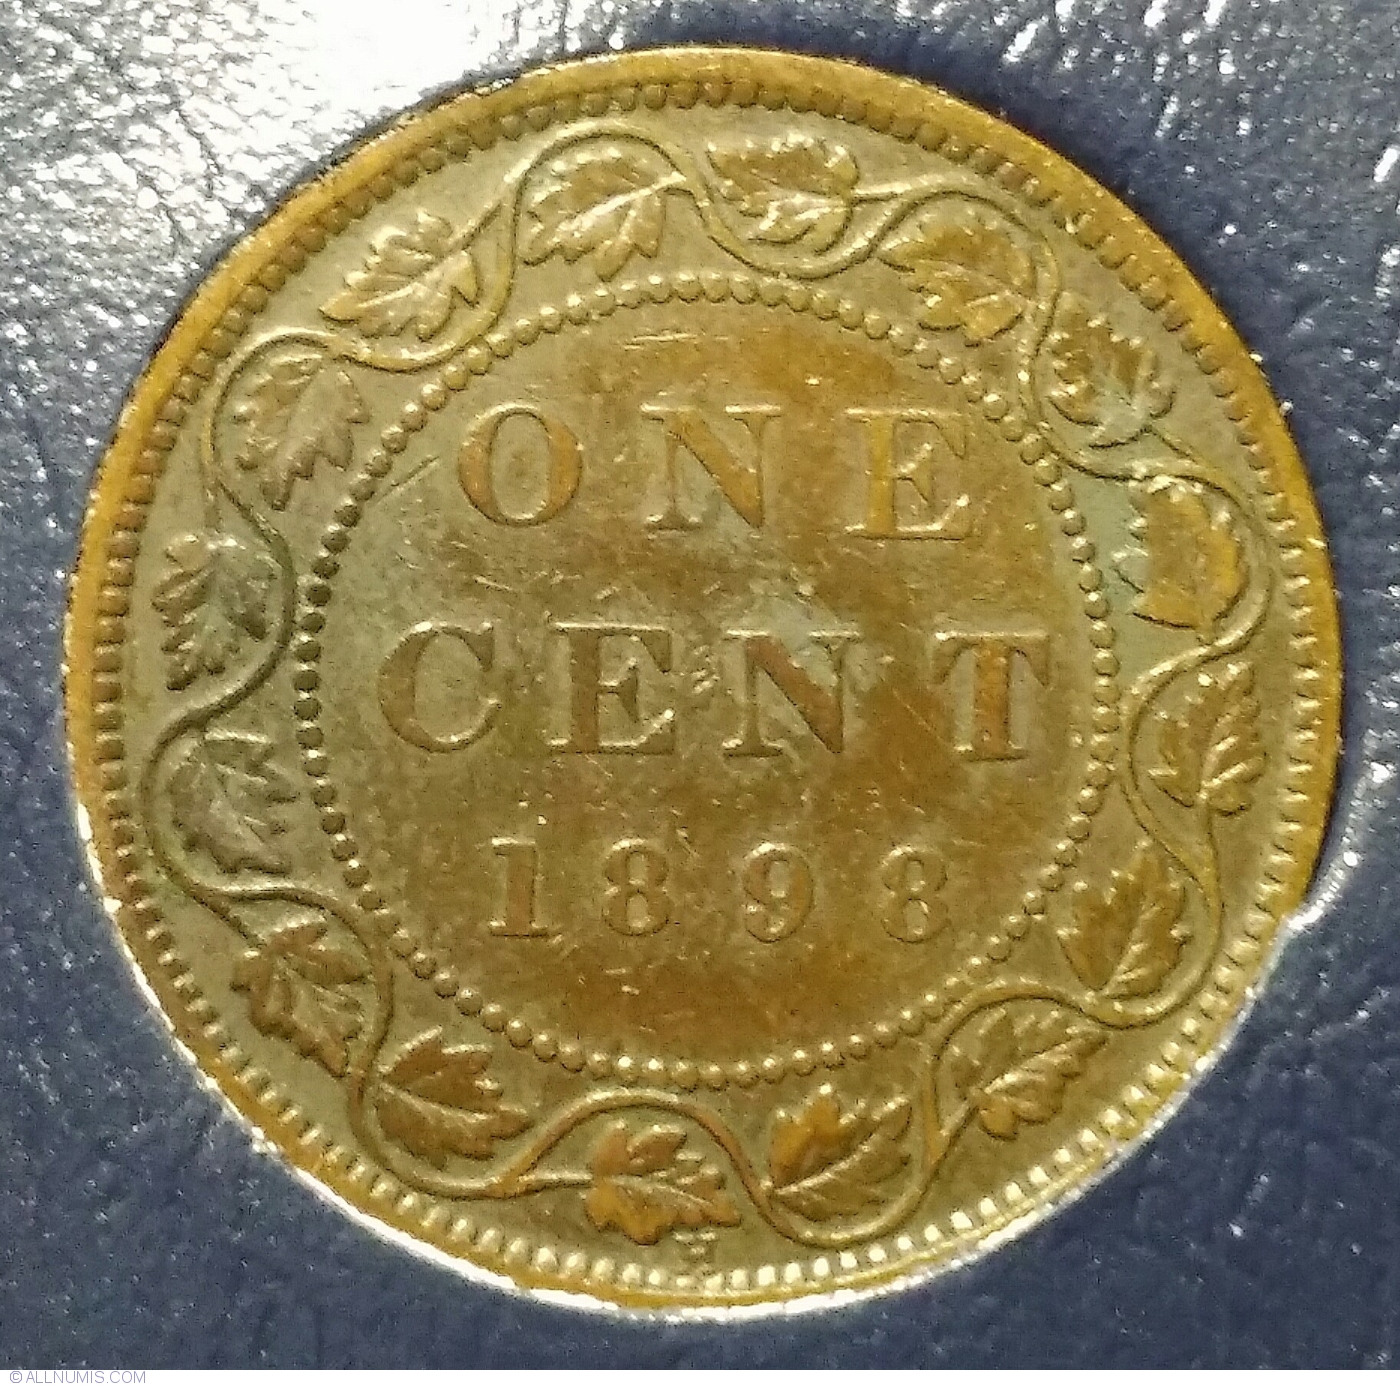 1898 historical currency converter